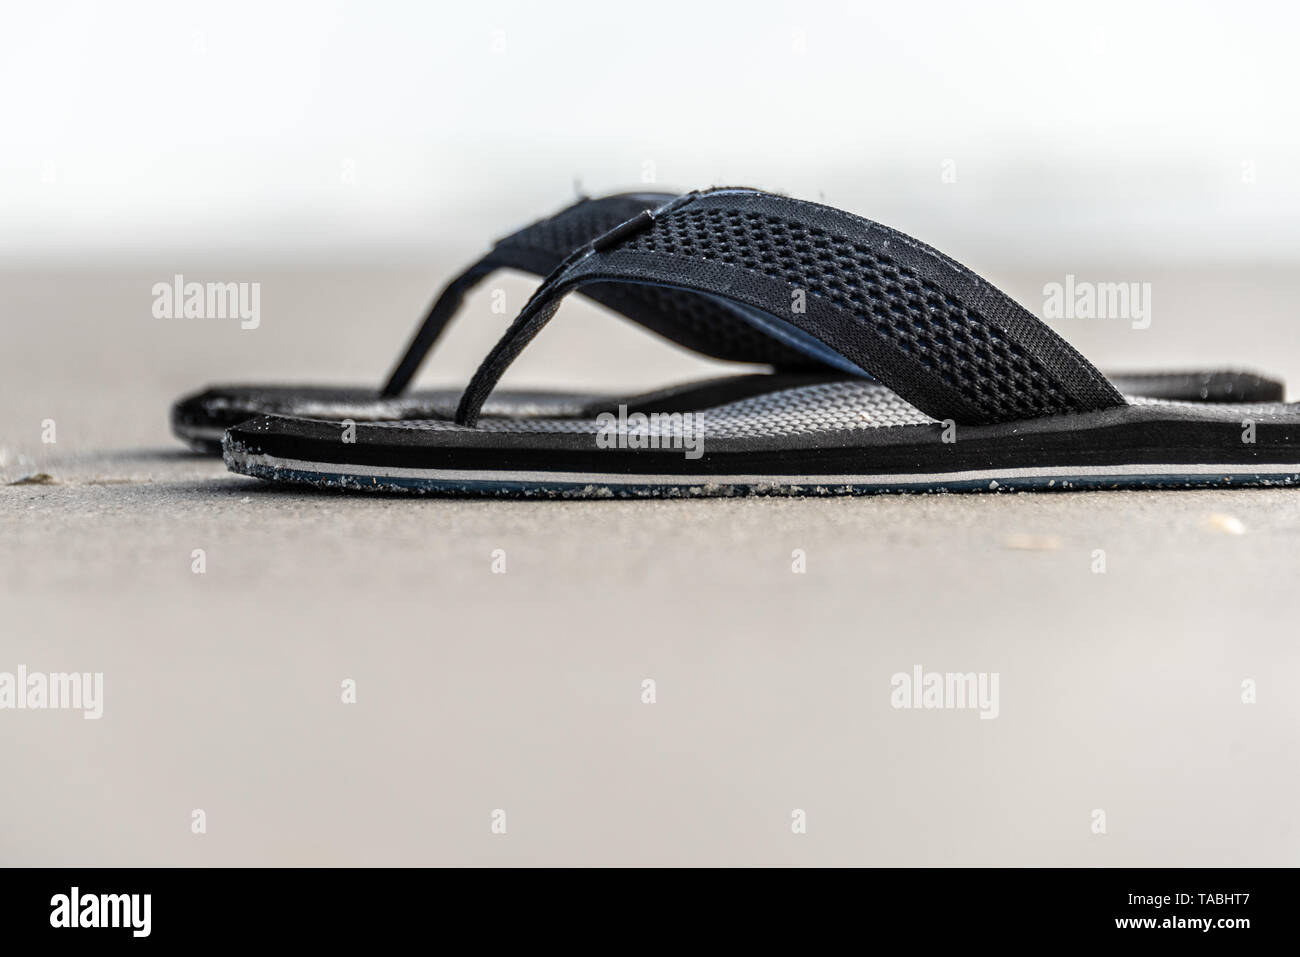 Selective-focus, low-angle view of black sandals on wet beach sand. Stock Photo